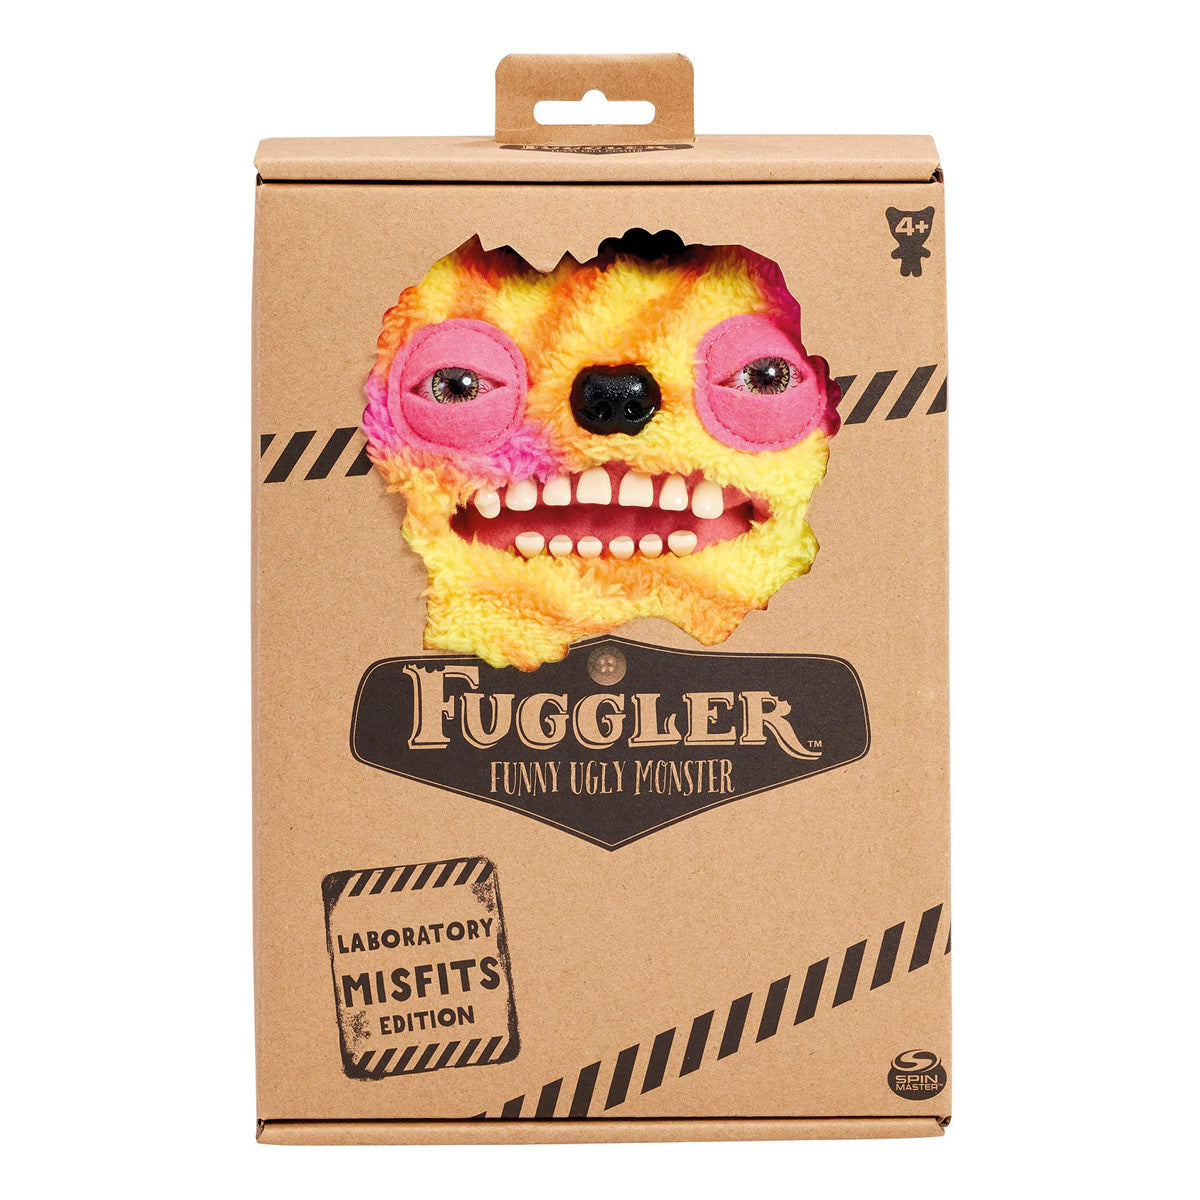 Fuggler - Laboratory Misfits Old Tooth (Tie-dye) Soft Toy